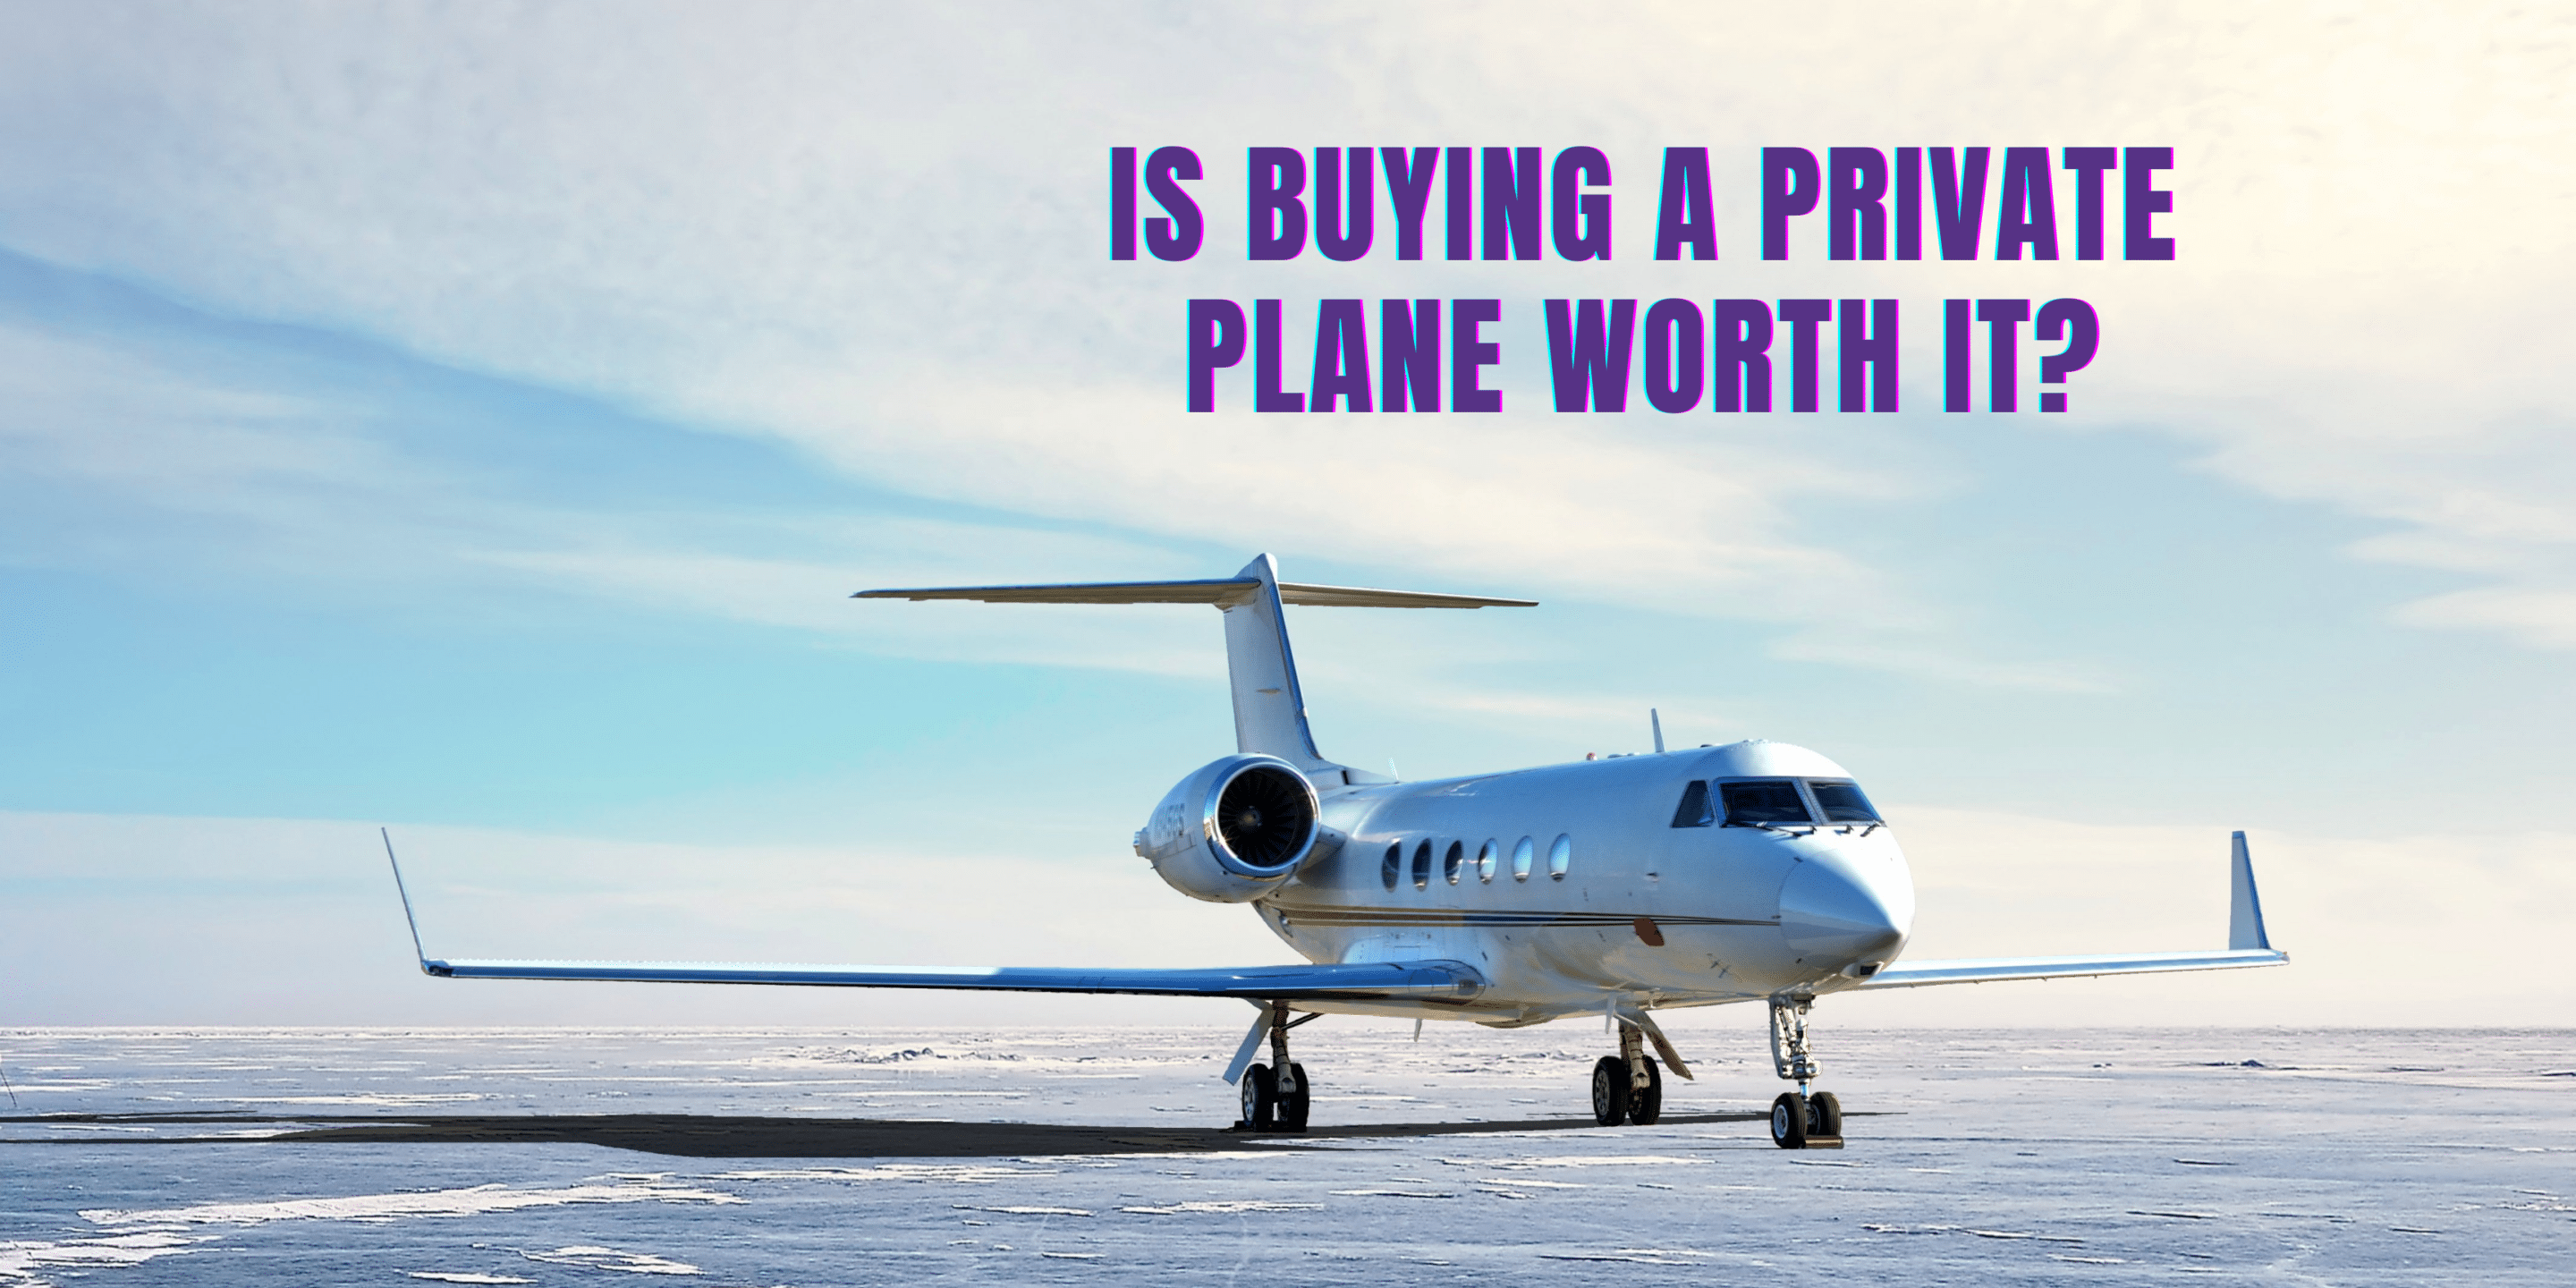 Is buying a private plane worth it?